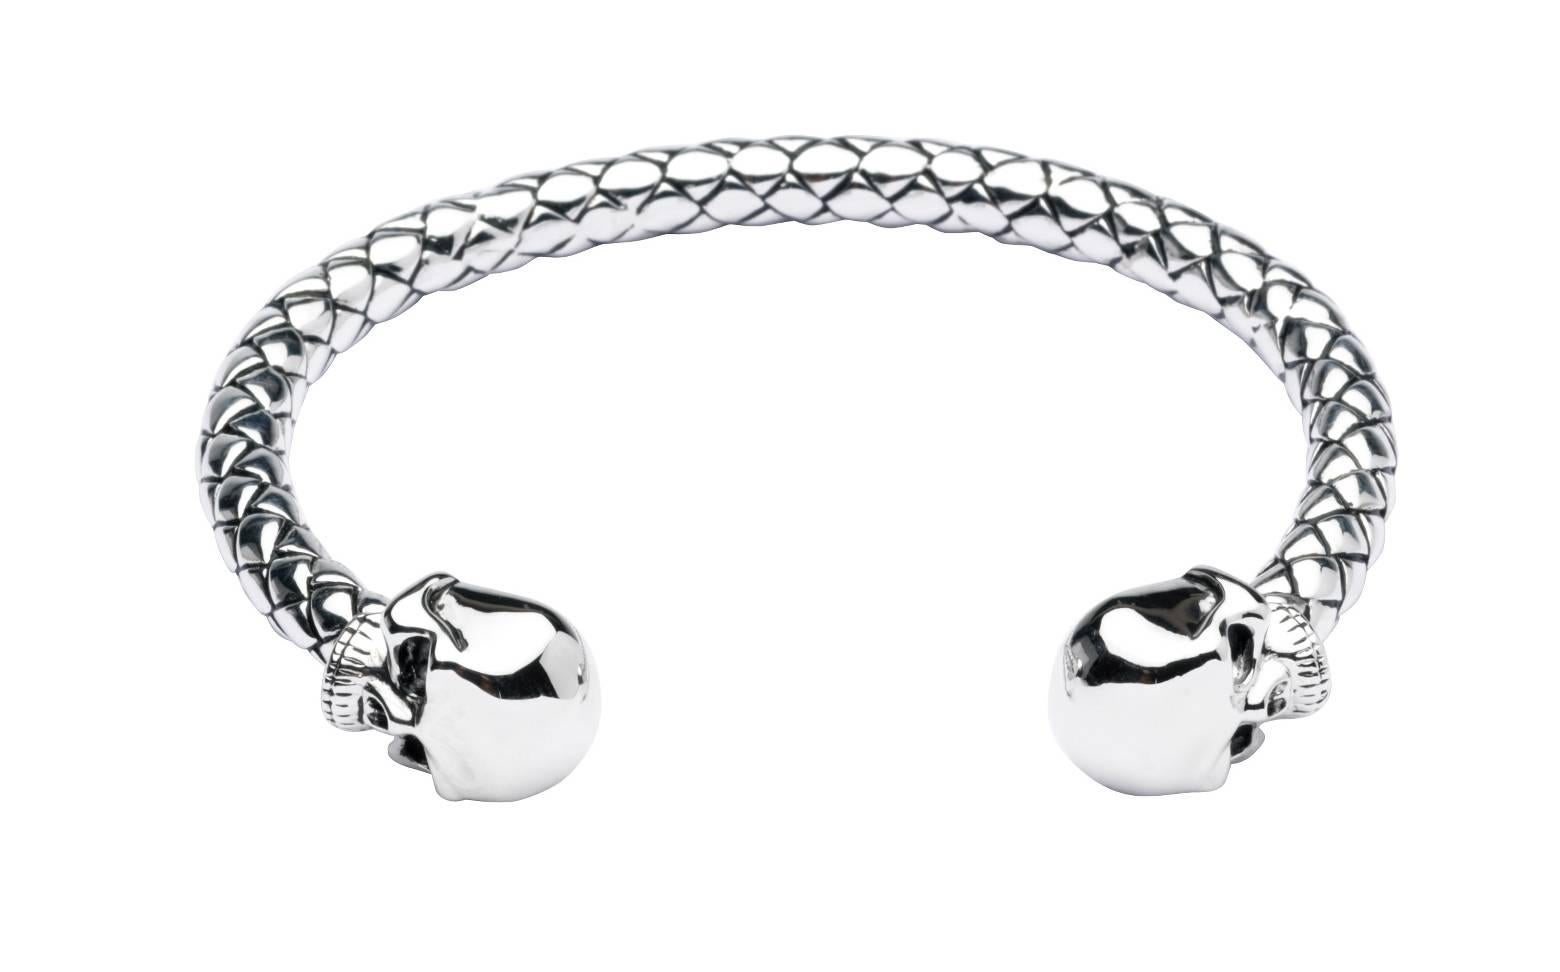 PLEASE NOTE: OUR PRICE IS FULLY INCLUSIVE OF SHIPPING, IMPORTATION TAXES & DUTIES

The silver skull bangle is made from solid sterling silver, which have been oxidised to create its darker tone. This torque style bangle is self adjustable, simply